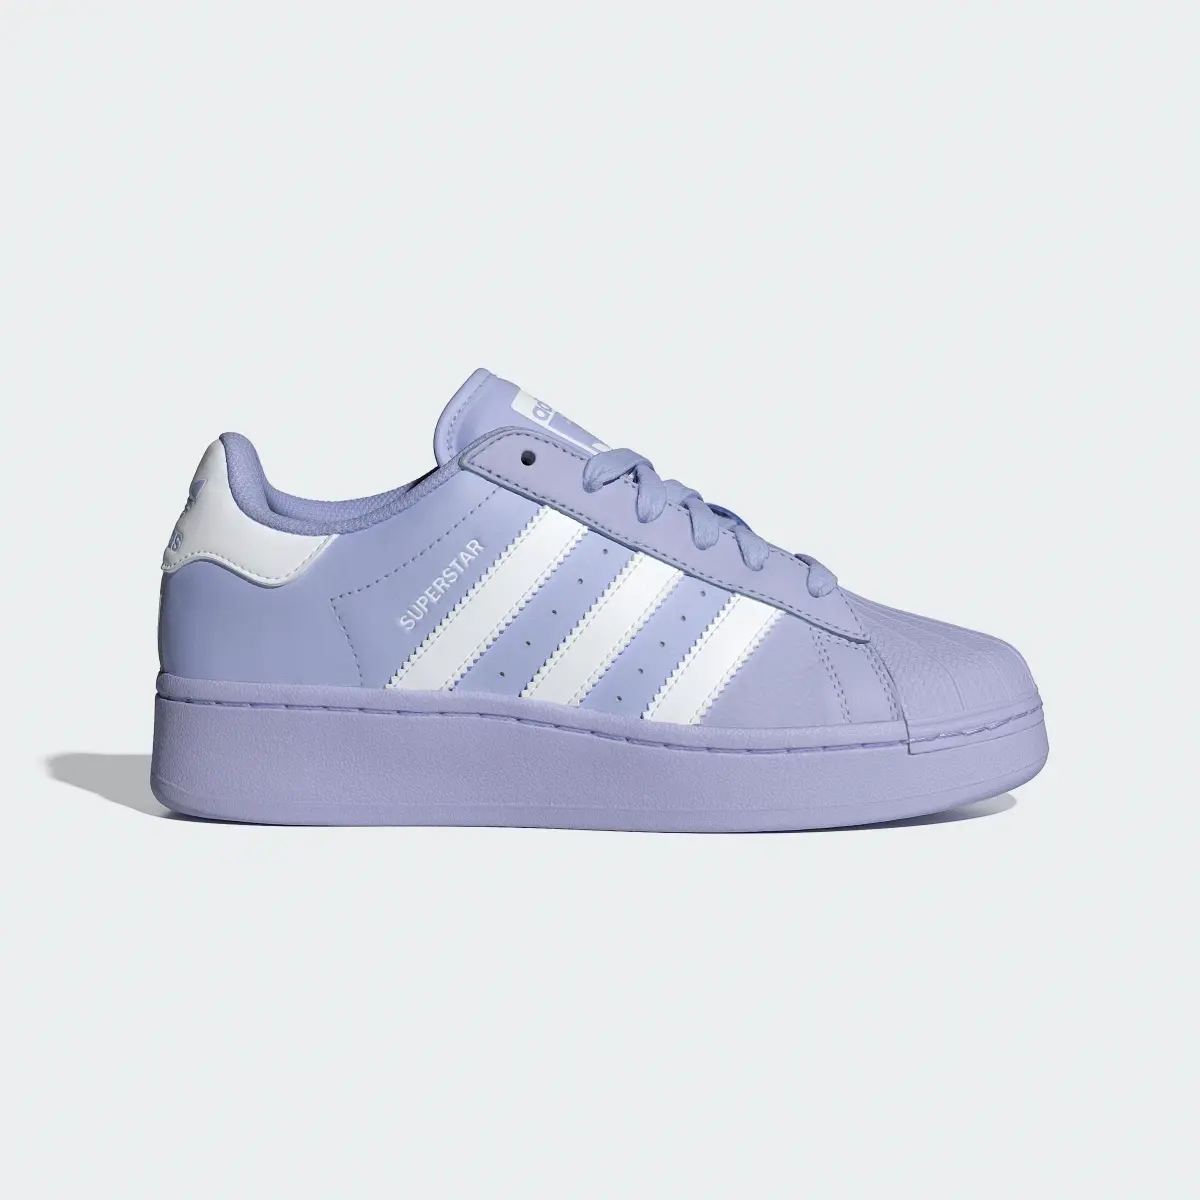 Adidas Superstar XLG Shoes. 2